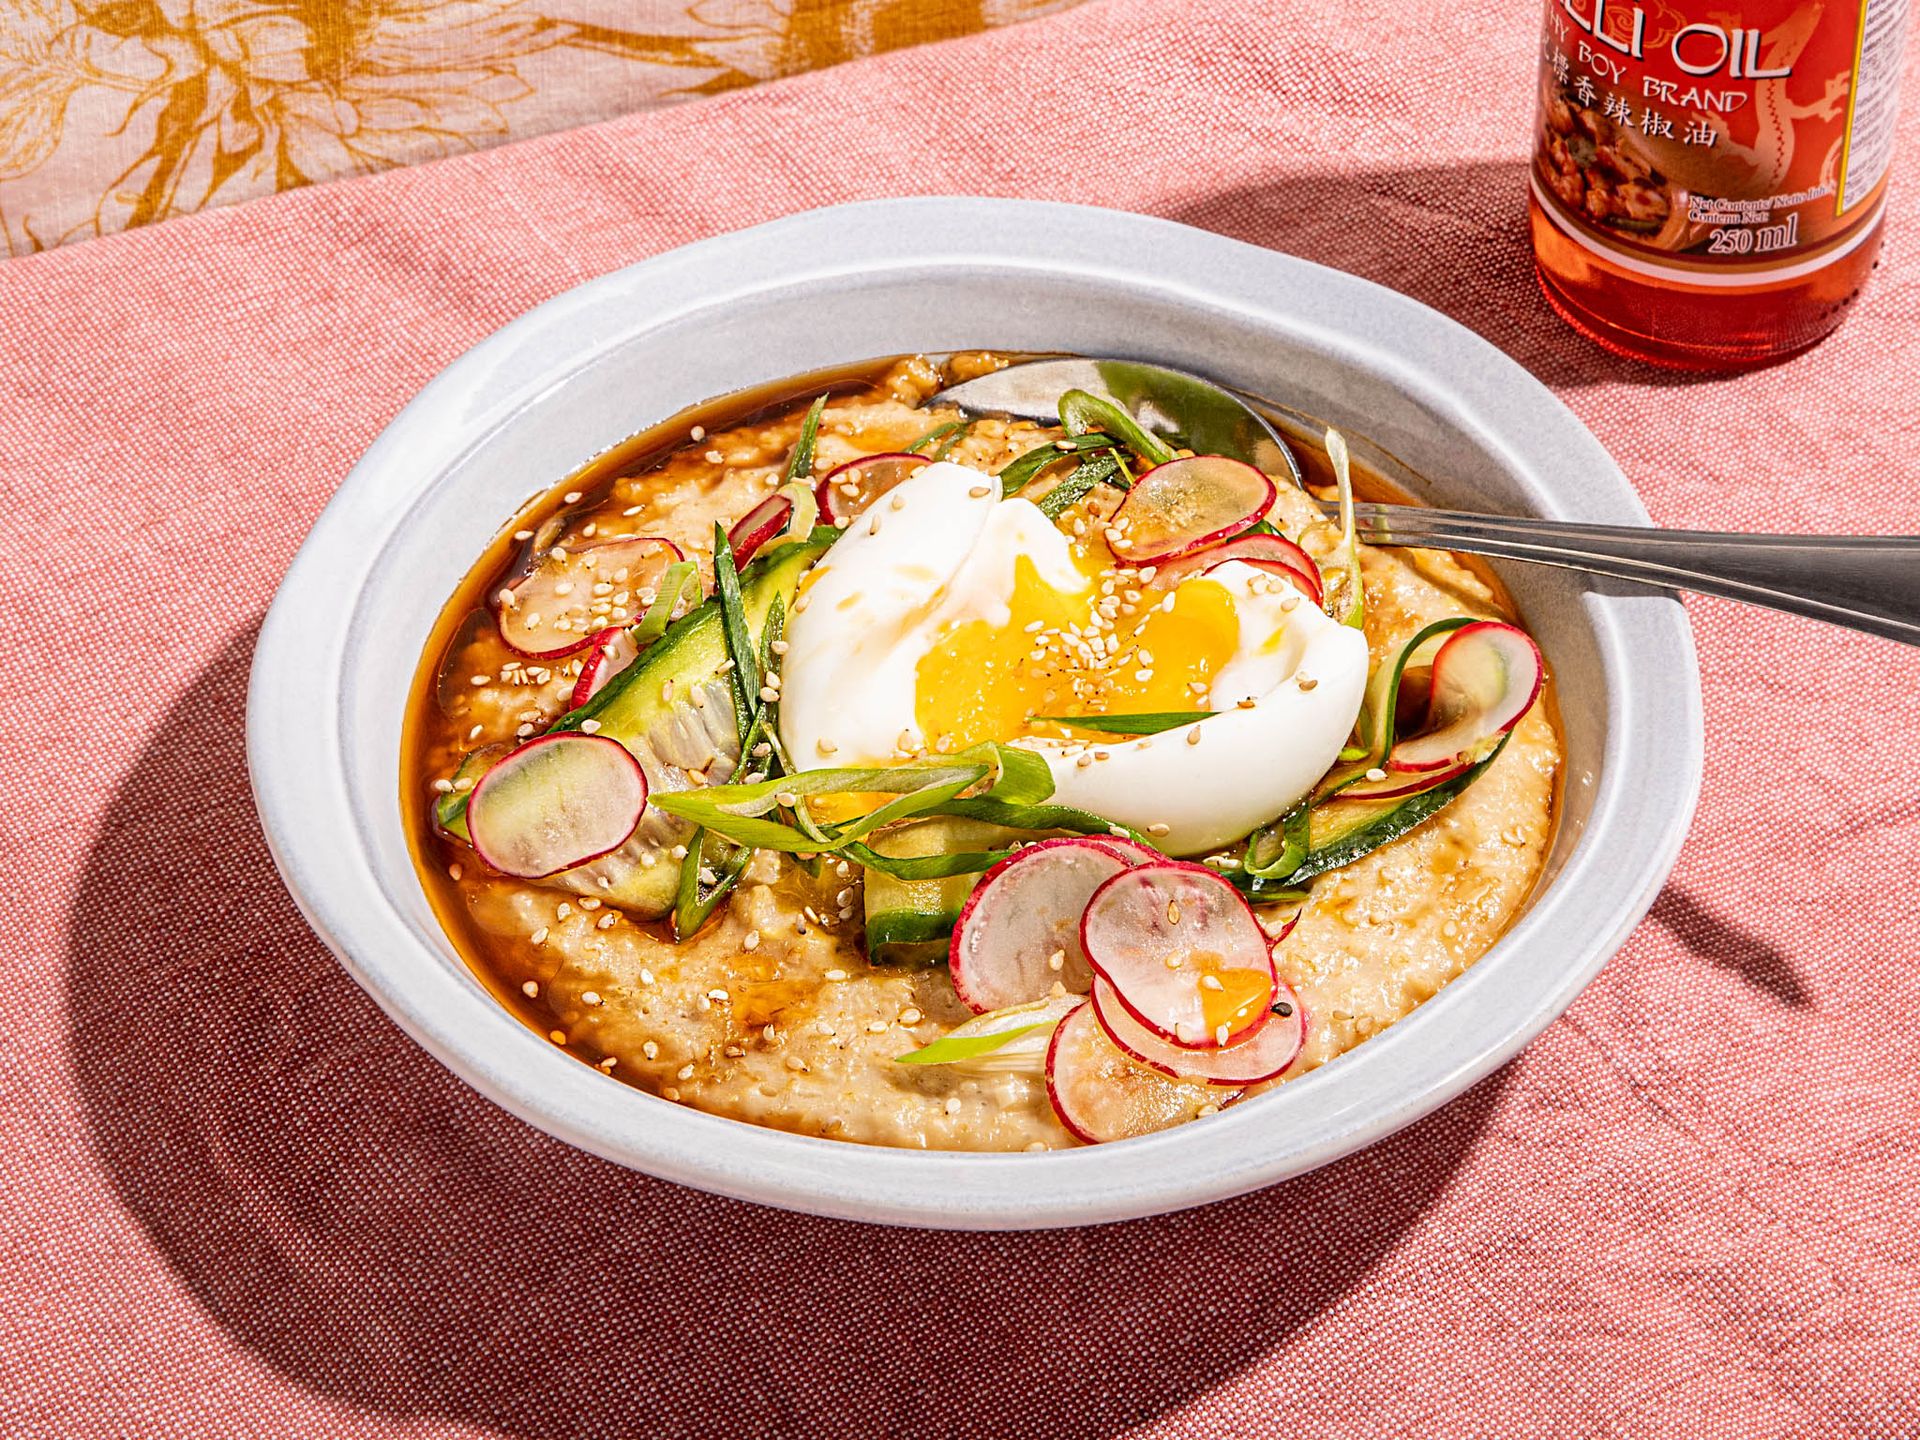 Savory oatmeal with jammy eggs